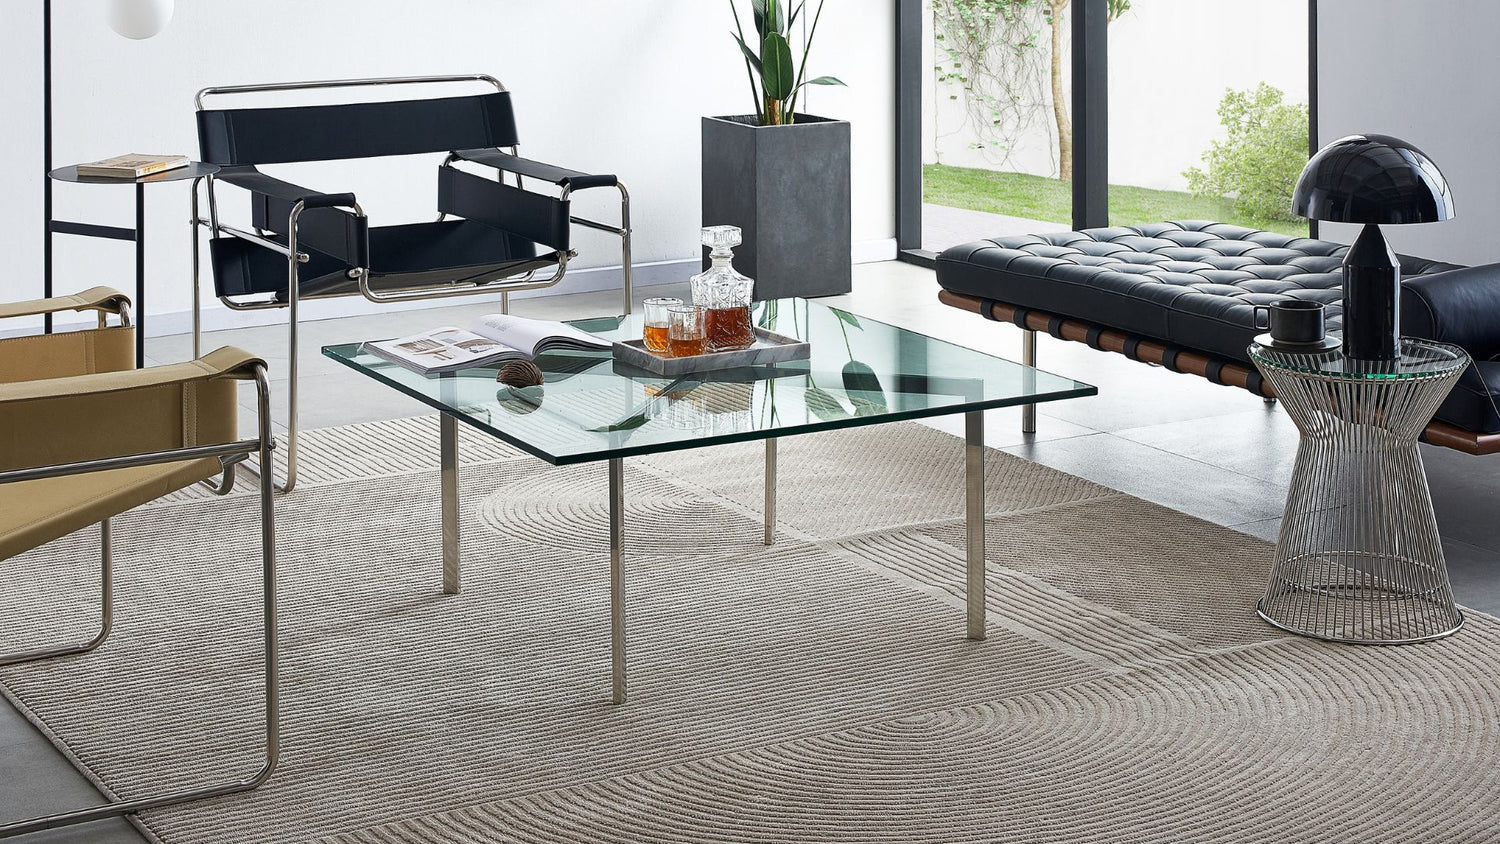 Design trends: Glass Top Coffee Tables in Contemporary Interiors